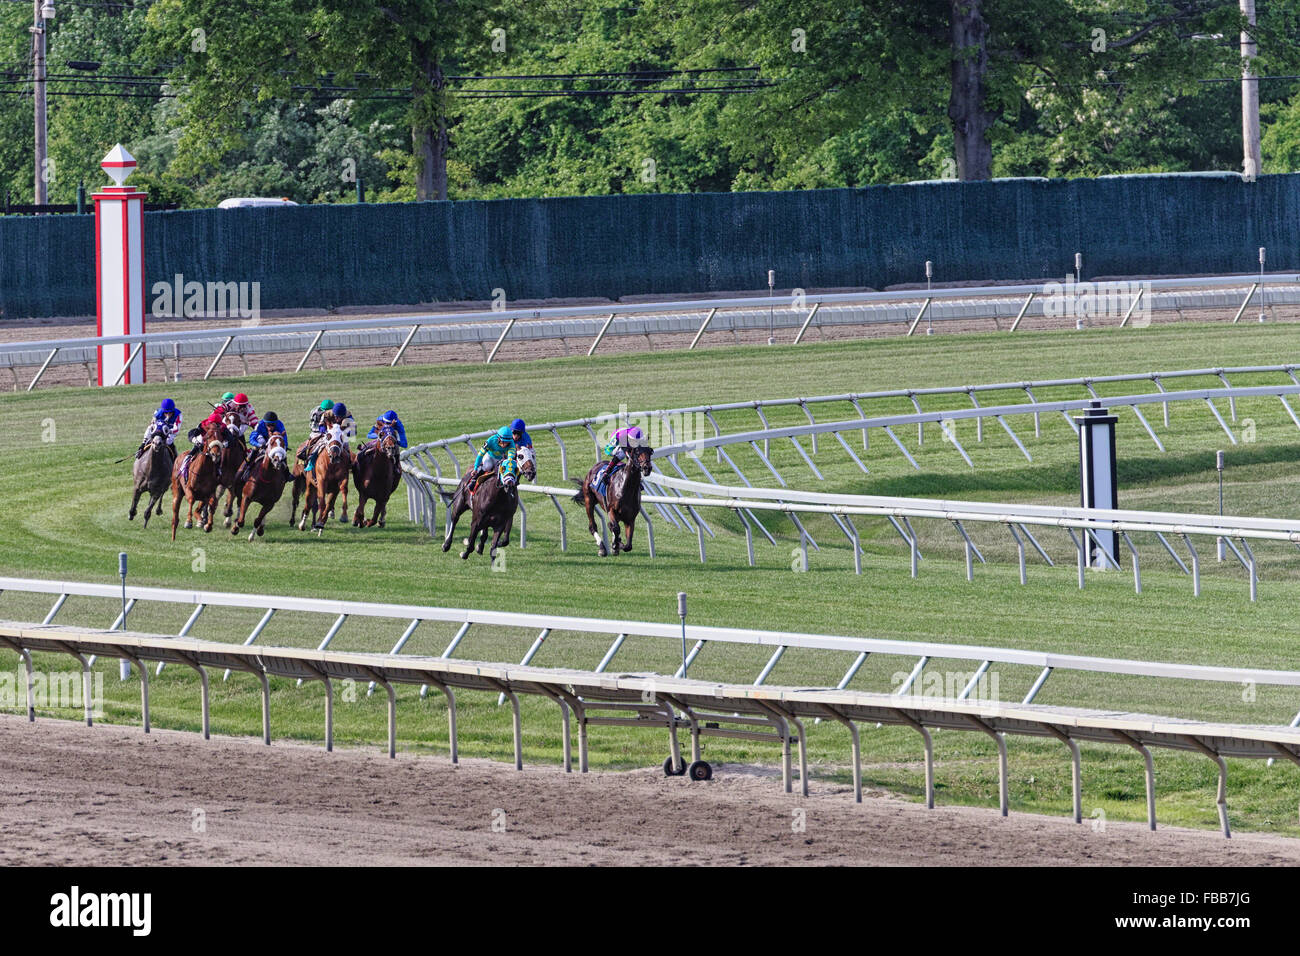 View of a Group of Jockeys on Horses Racing, Monmouth Park Racetrack, Oceanport, New Jersey Stock Photo